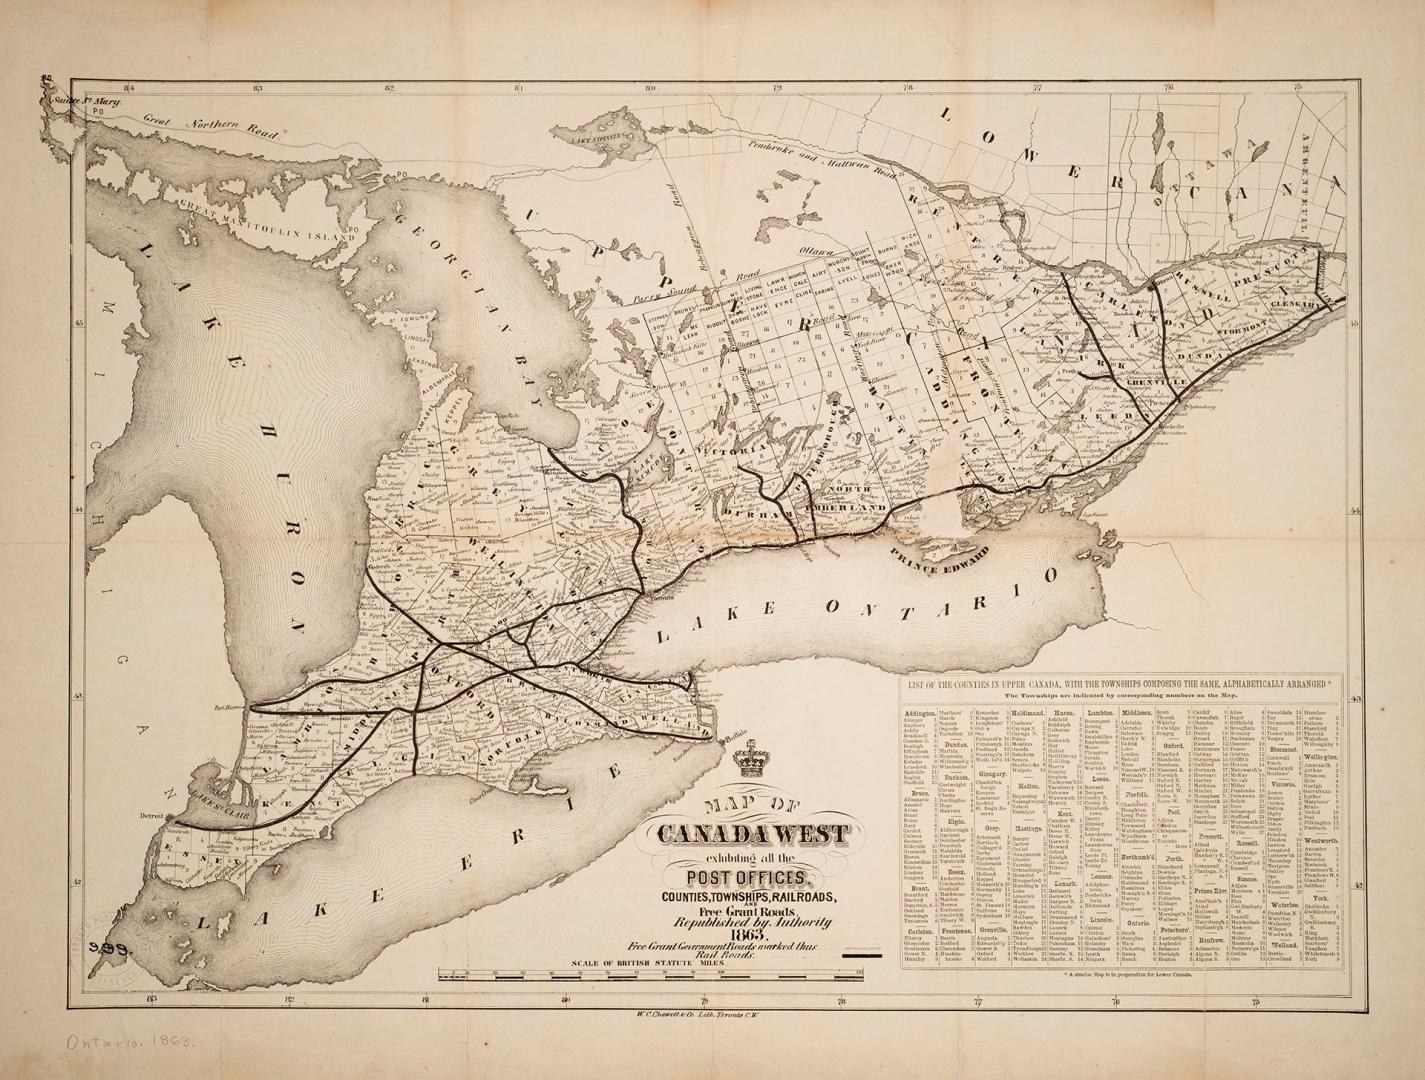 Map of Canada West exhibiting all the post offices, counties, railroads, and free grant roads, republished by authority 1863